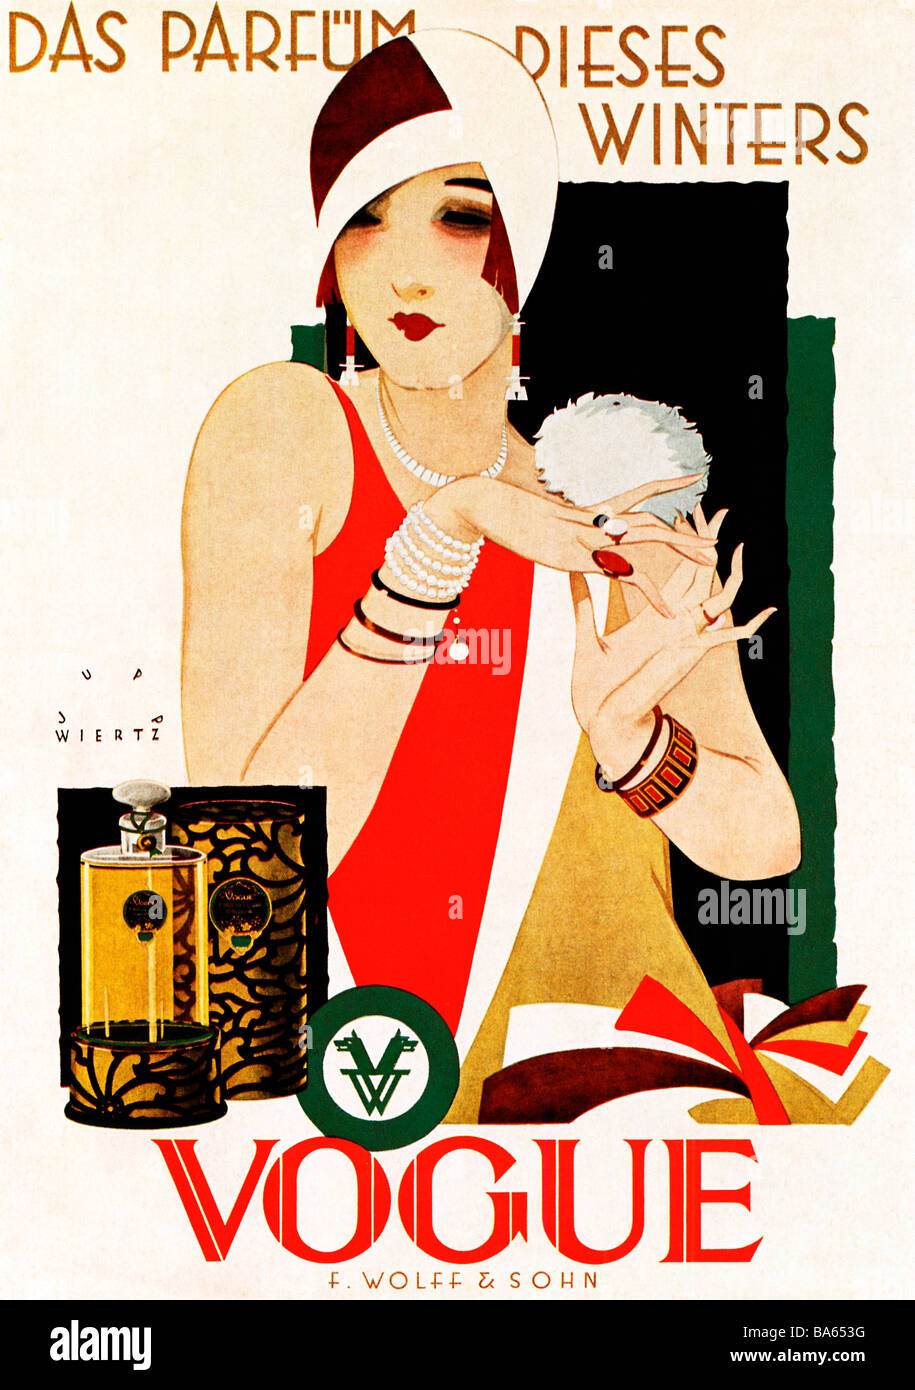 Vogue Perfume 1927 Art Deco poster by Jupp Wiertz for the German scent The Perfume for This Winter Stock Photo